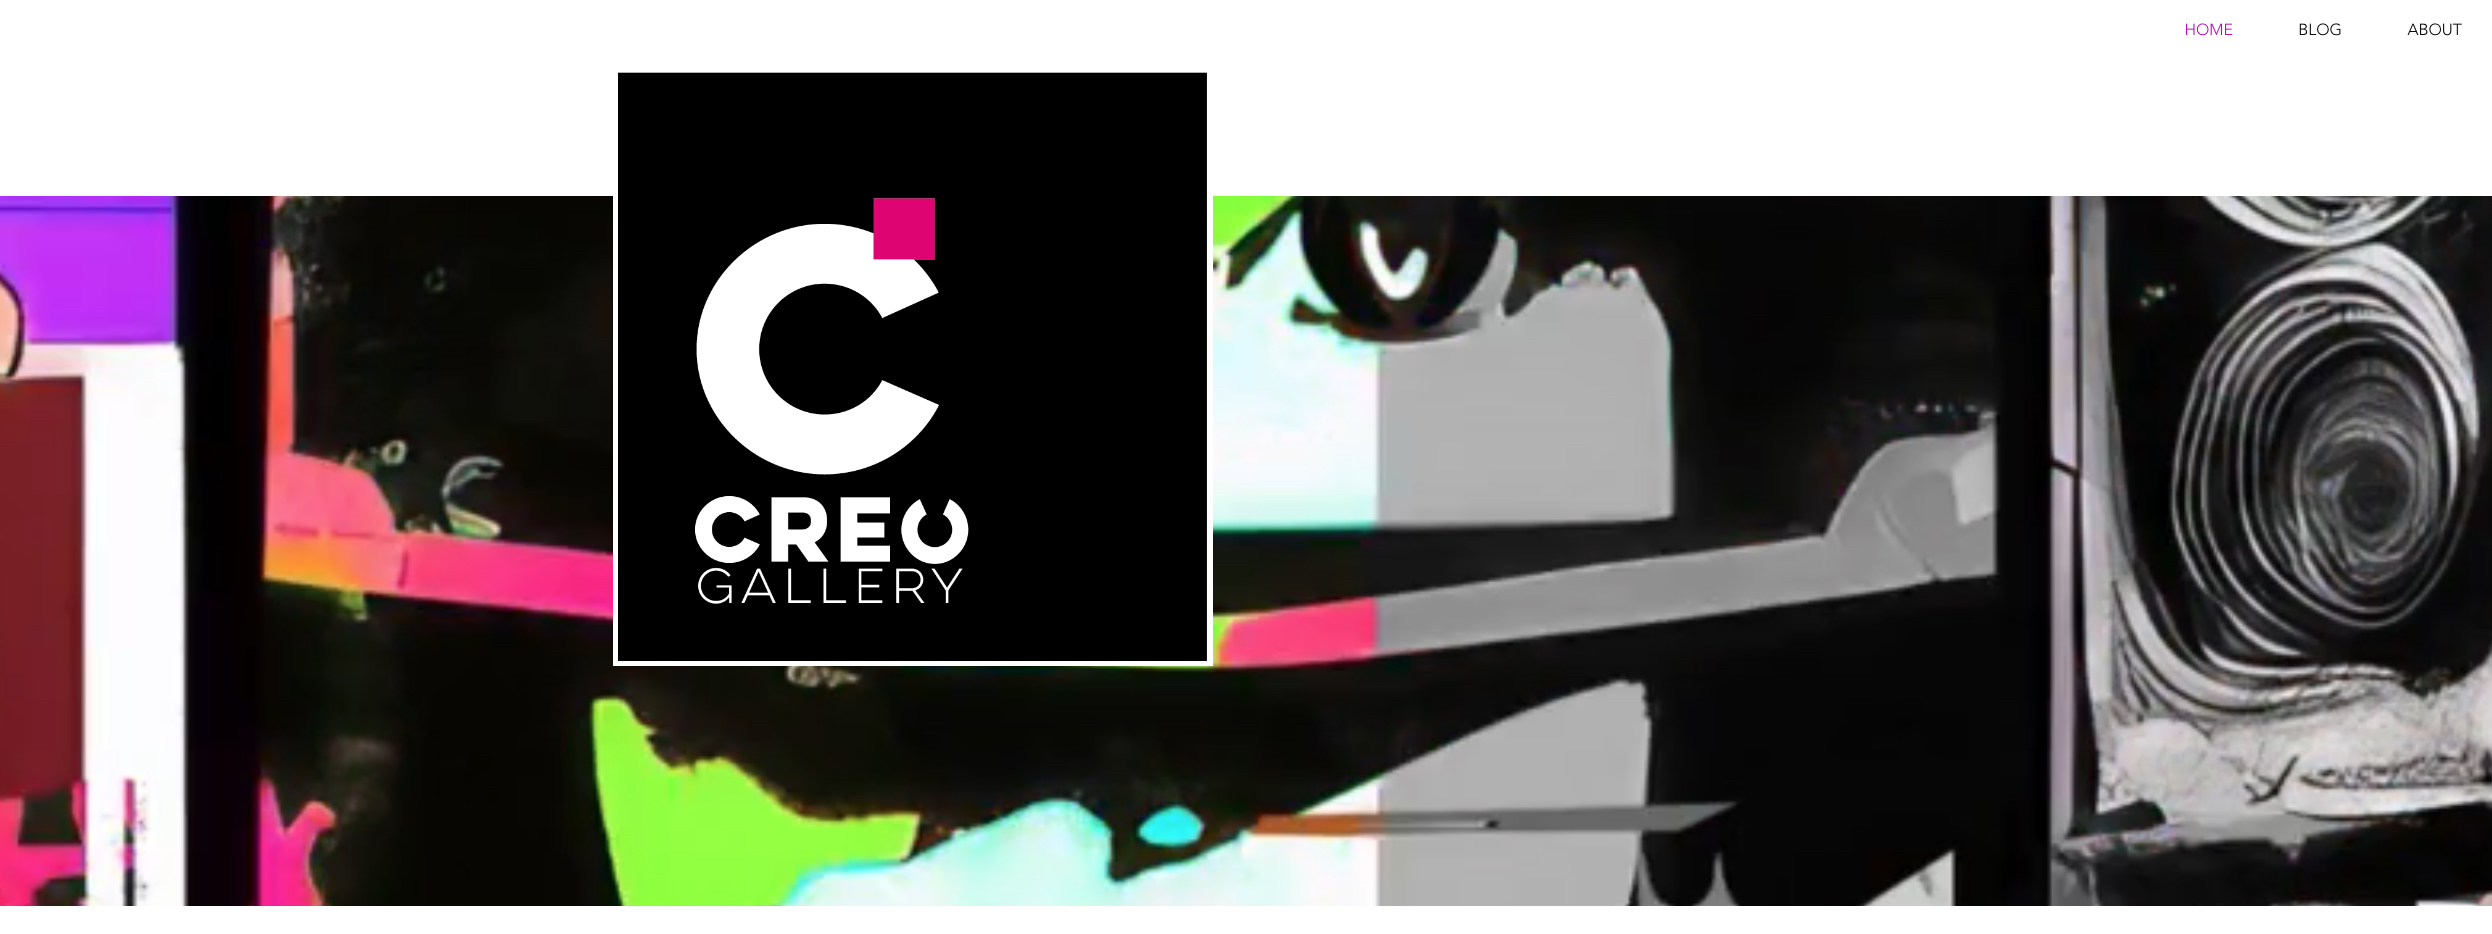 Creo gallery, header to a creative online gallery